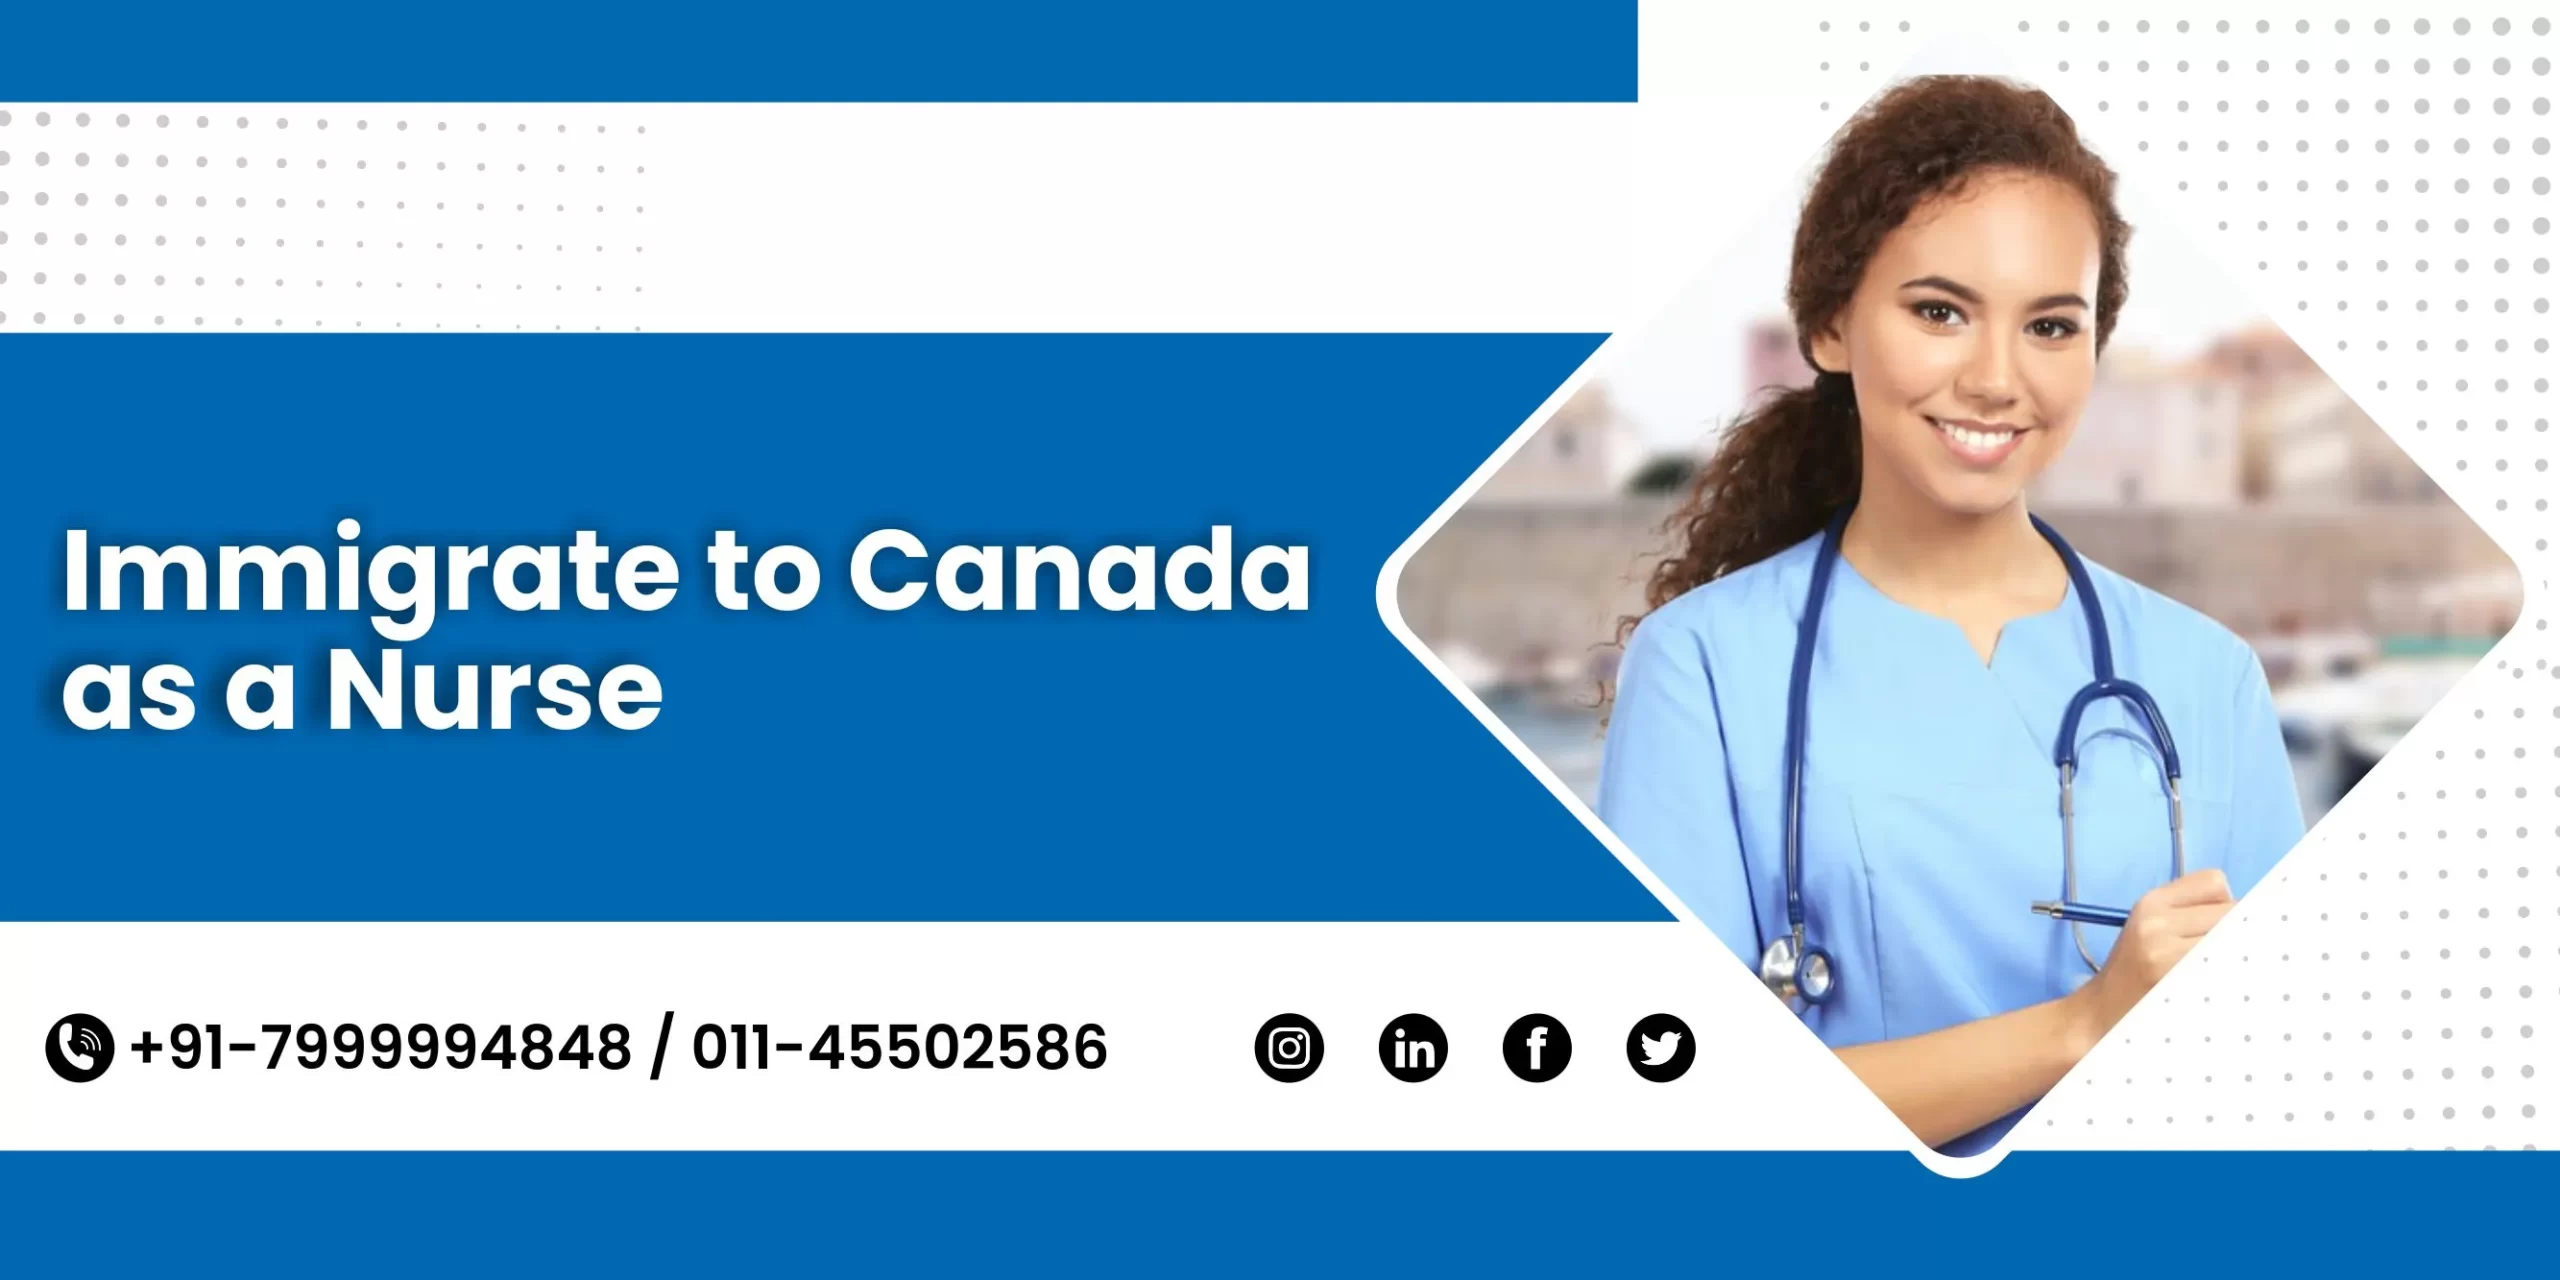 Immigrate to Canada as a Nurse